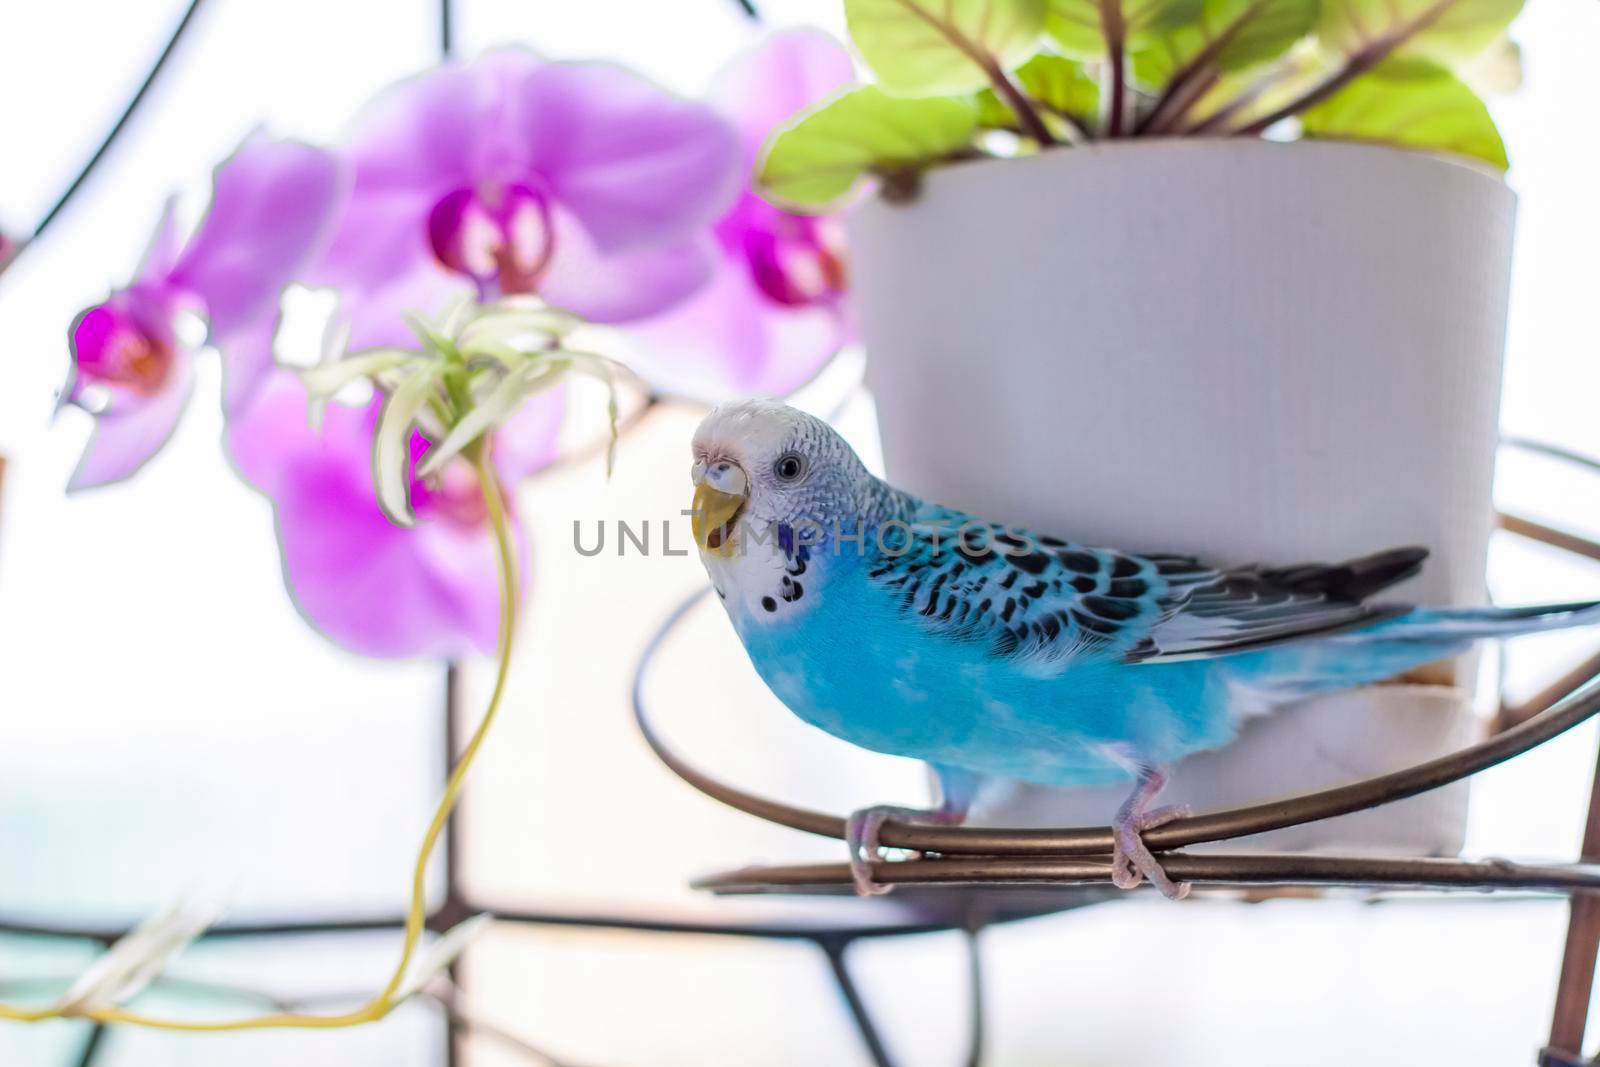 A beautiful blue budgie sits without a cage on a house plant. Tropical birds at home.  by Alina_Lebed